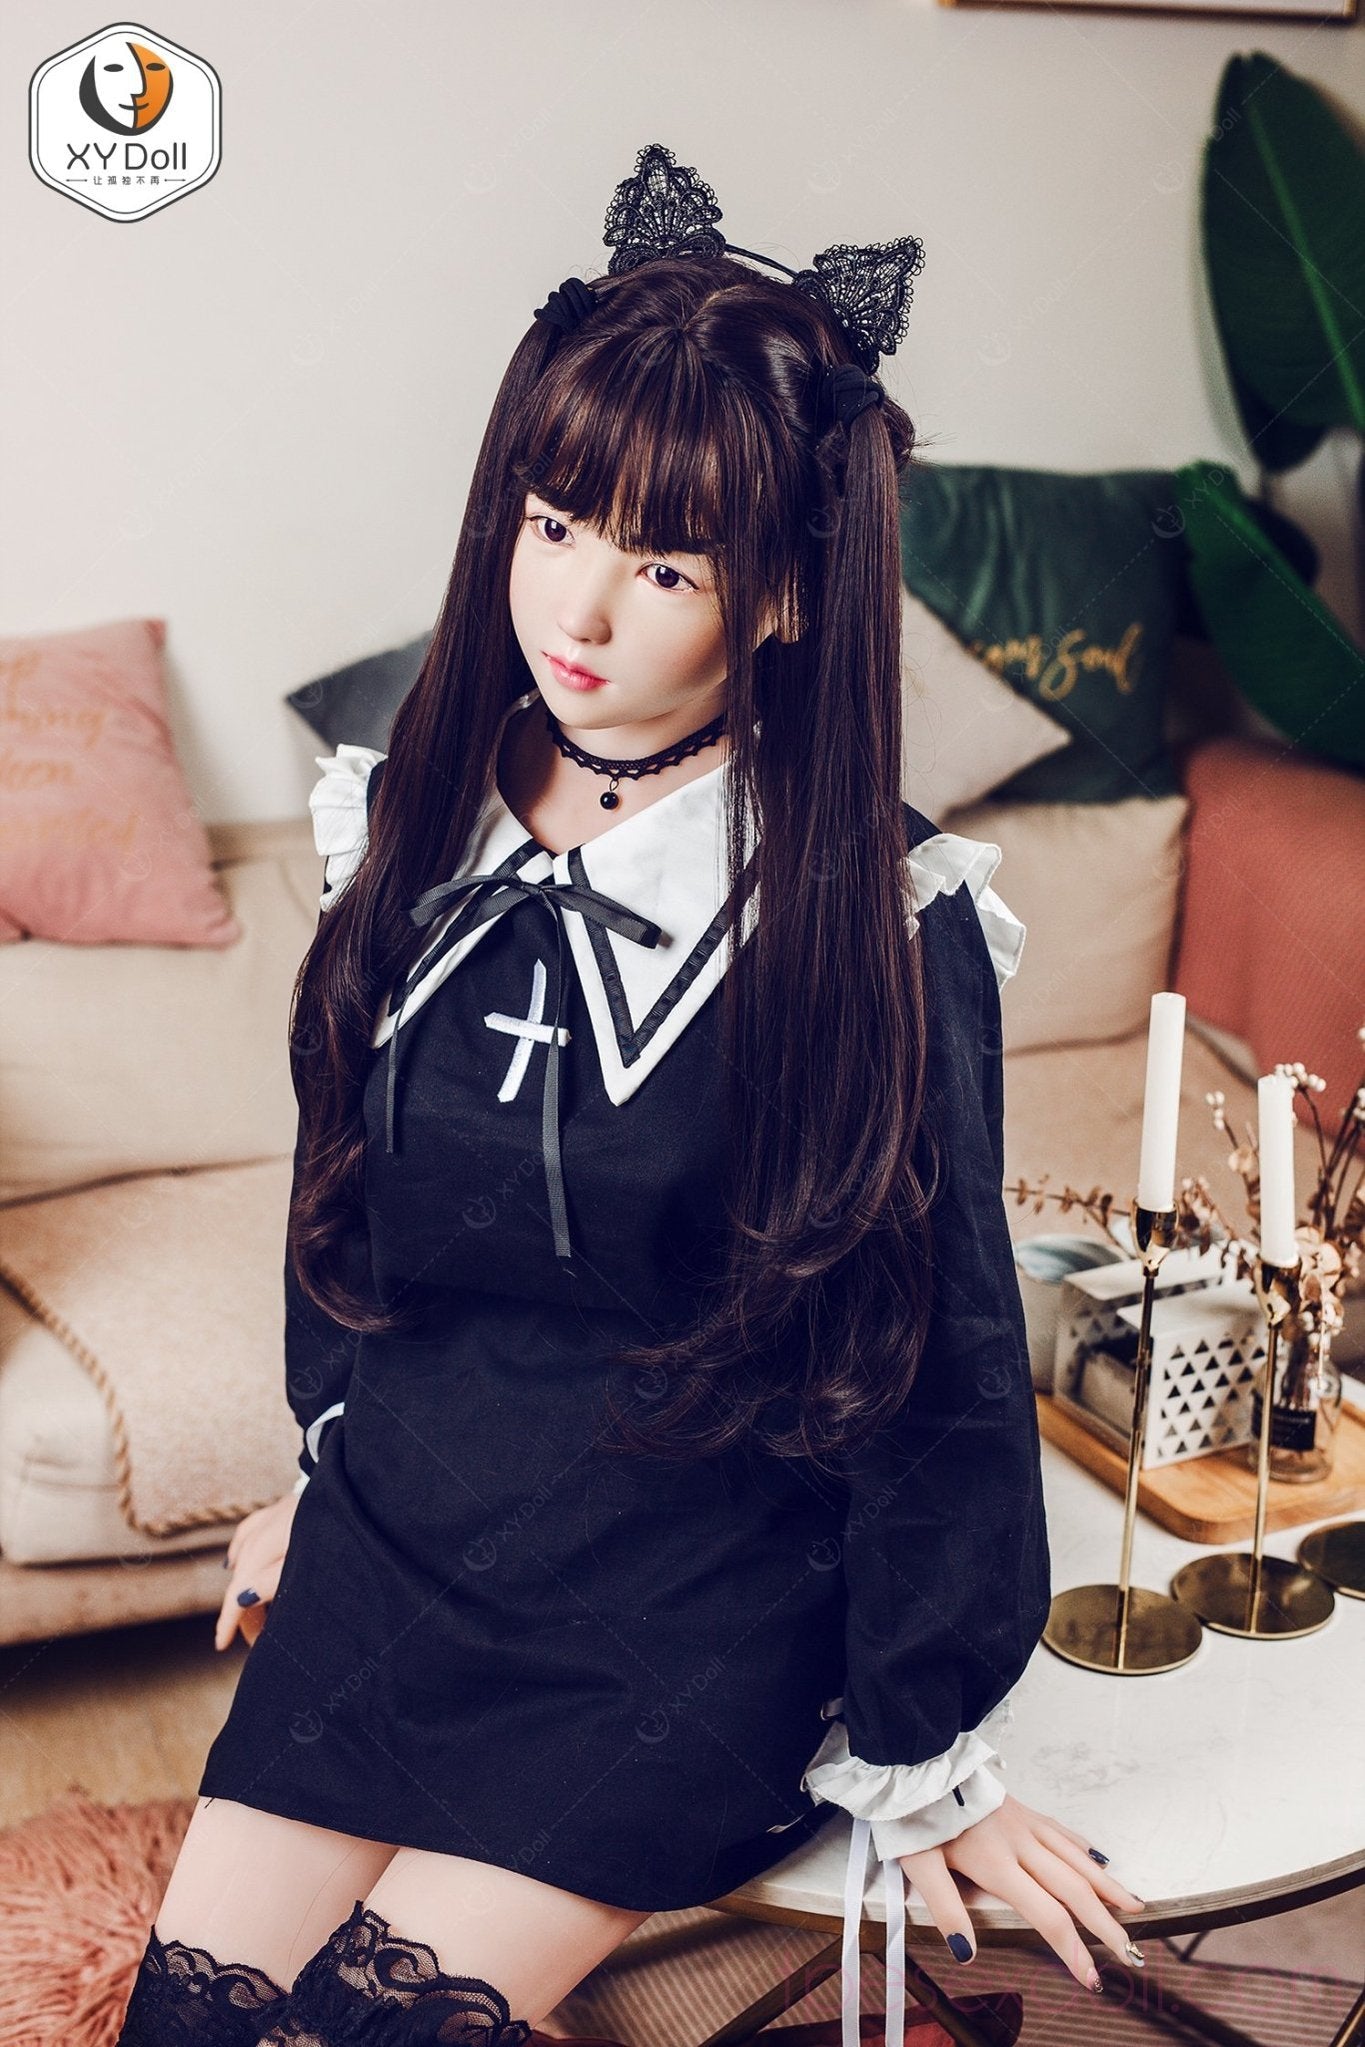 XY 152cm Small Breasts cute lolita sex doll Japanese girl Hua xiaorong - tpesexdoll.com